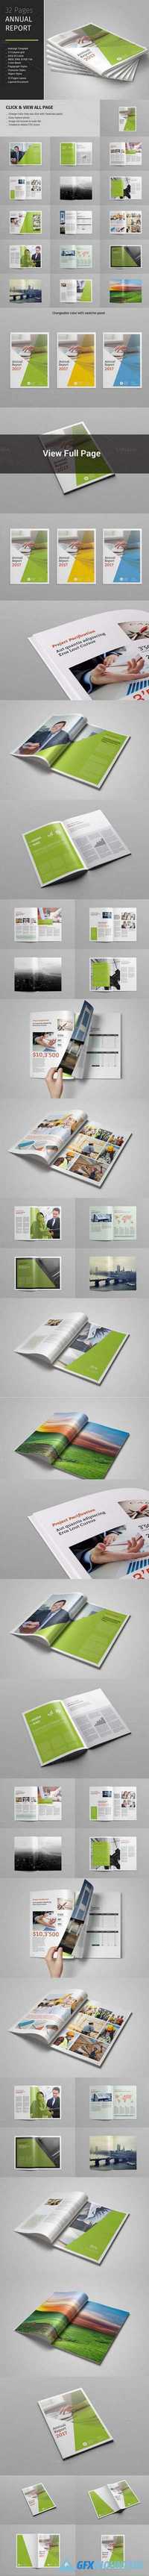 32 Pages Annual Report Template 908379